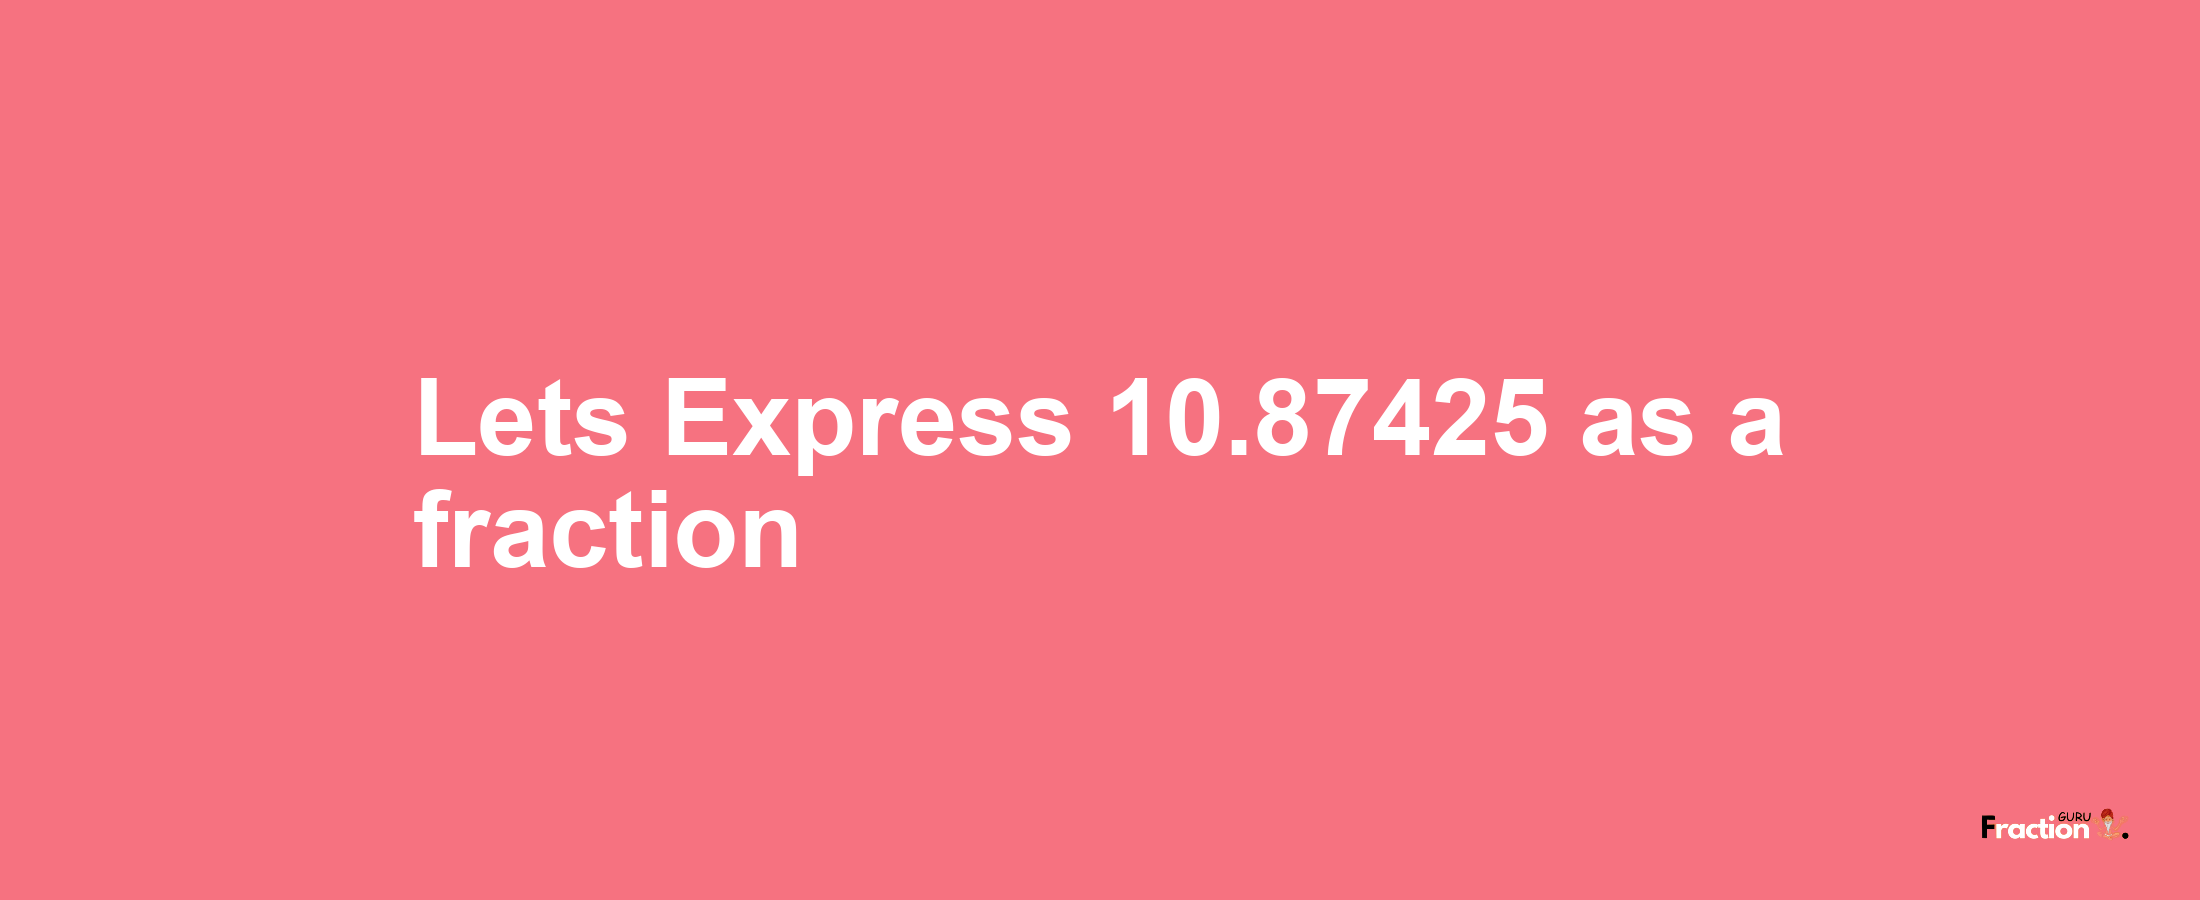 Lets Express 10.87425 as afraction